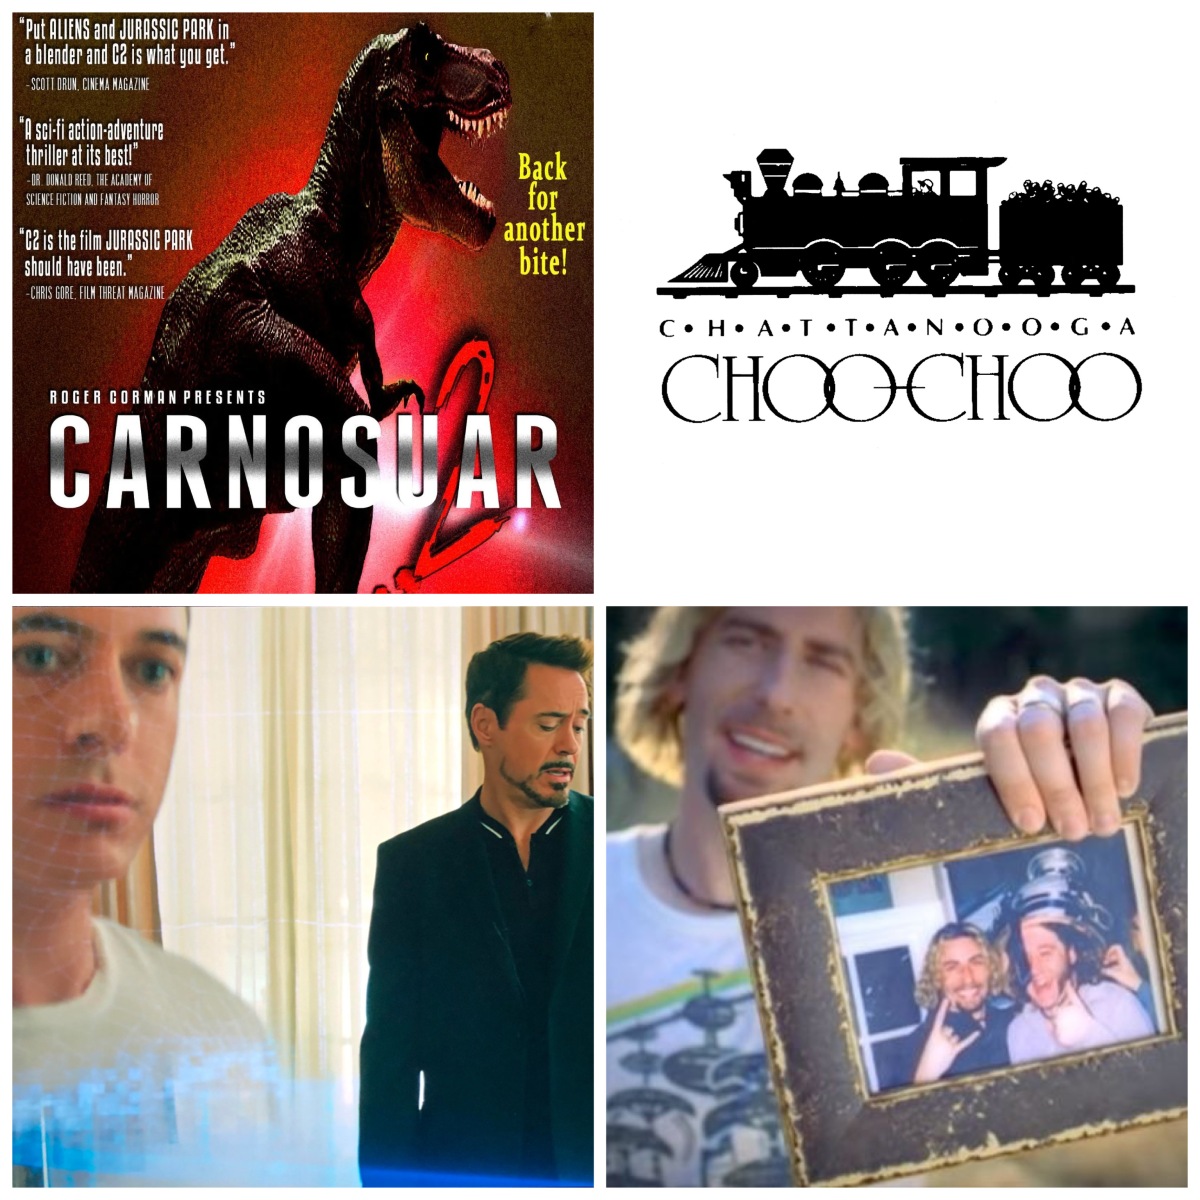 Carnosaur 2, the Chattanooga Choo Choo, a young/old Tony Stark in Captain America: Civil War, and Nickelback's Photograph.